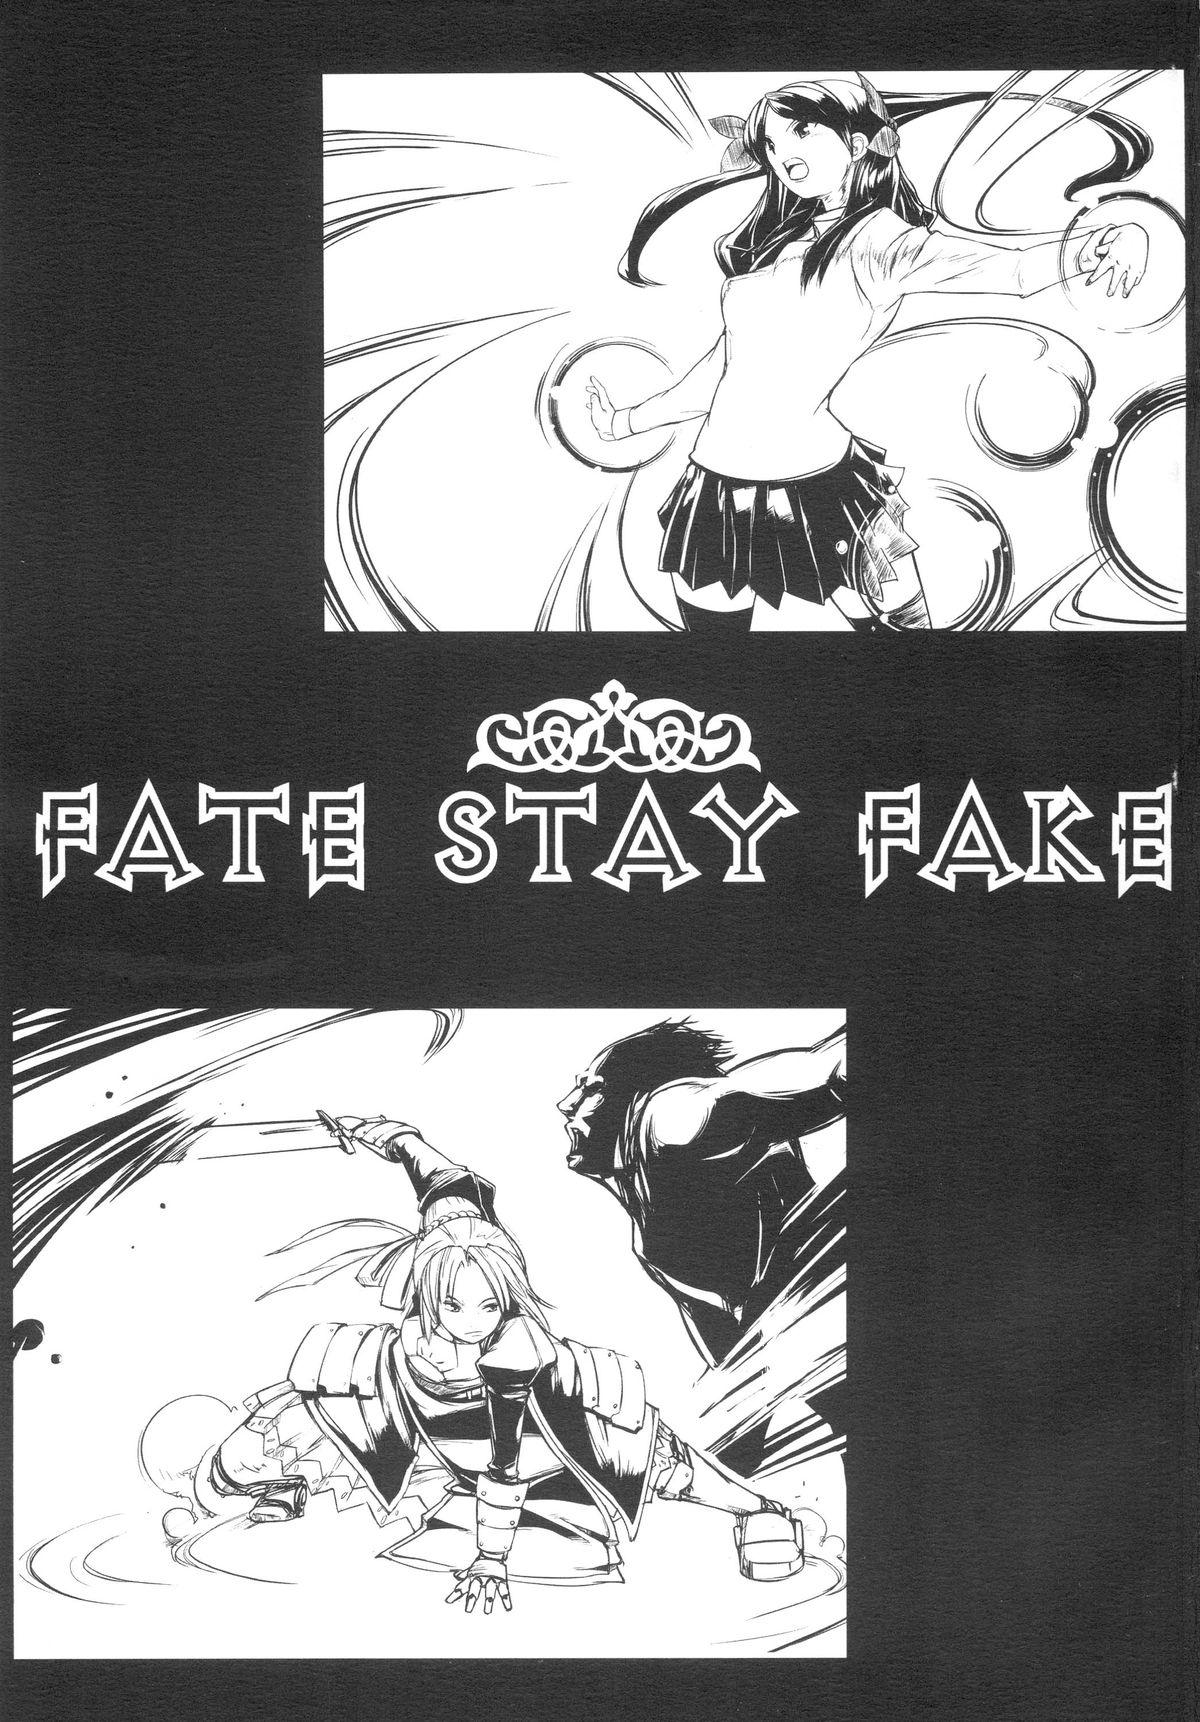 FATE STAY FAKE 1